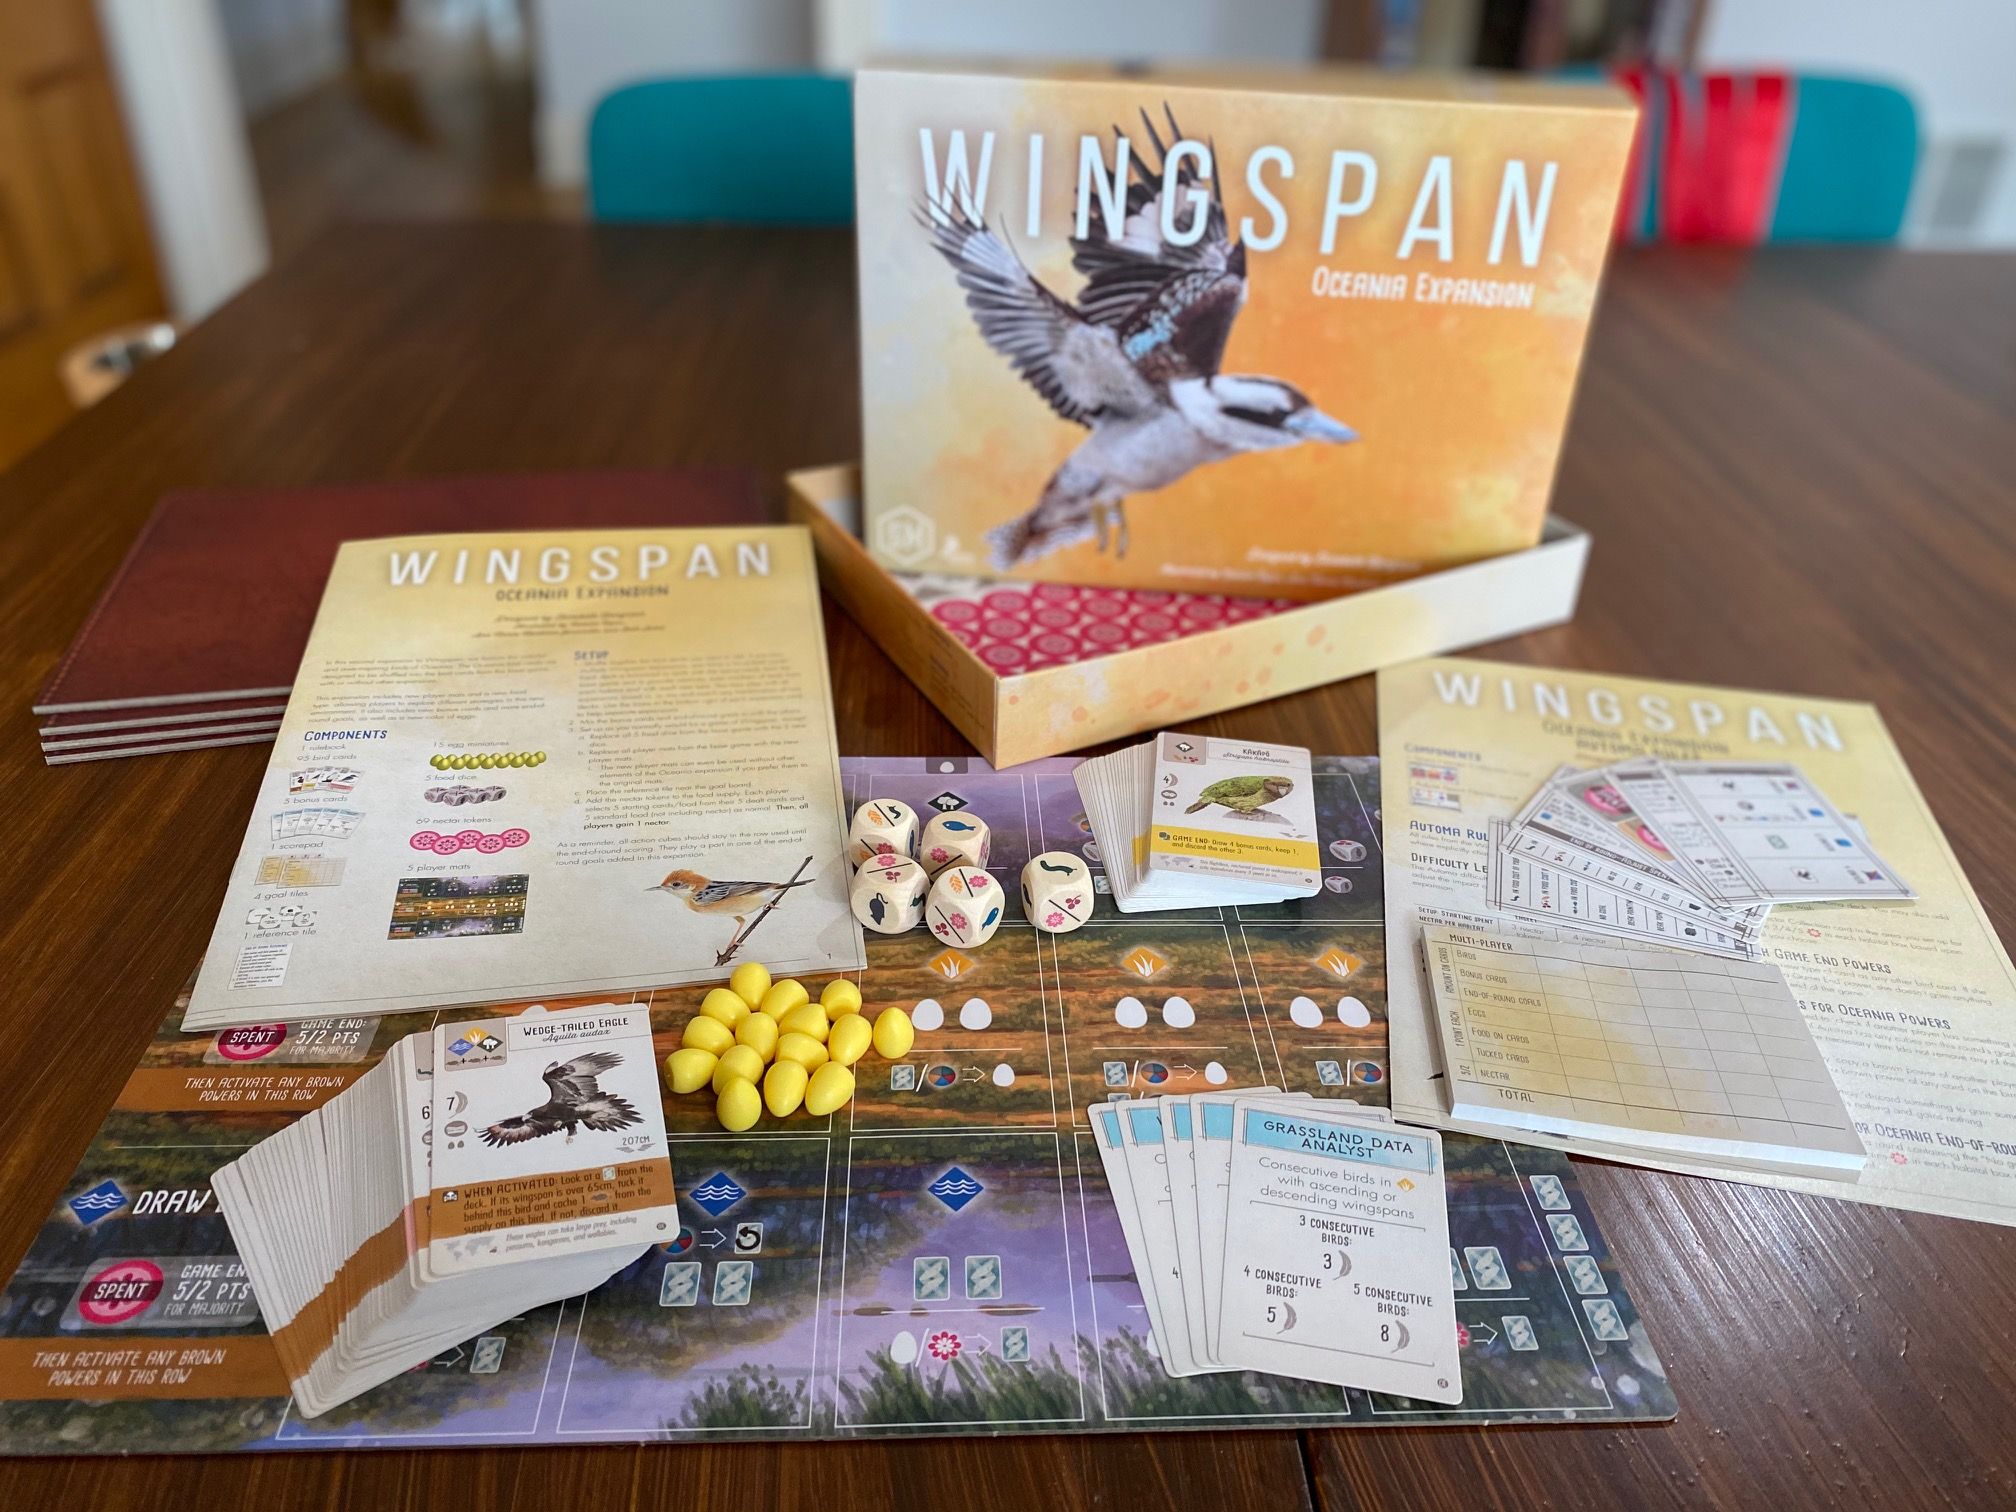 For Ages:10+ Free Expedited Shipping! Wingspan Oceania Expansion Strategy Game